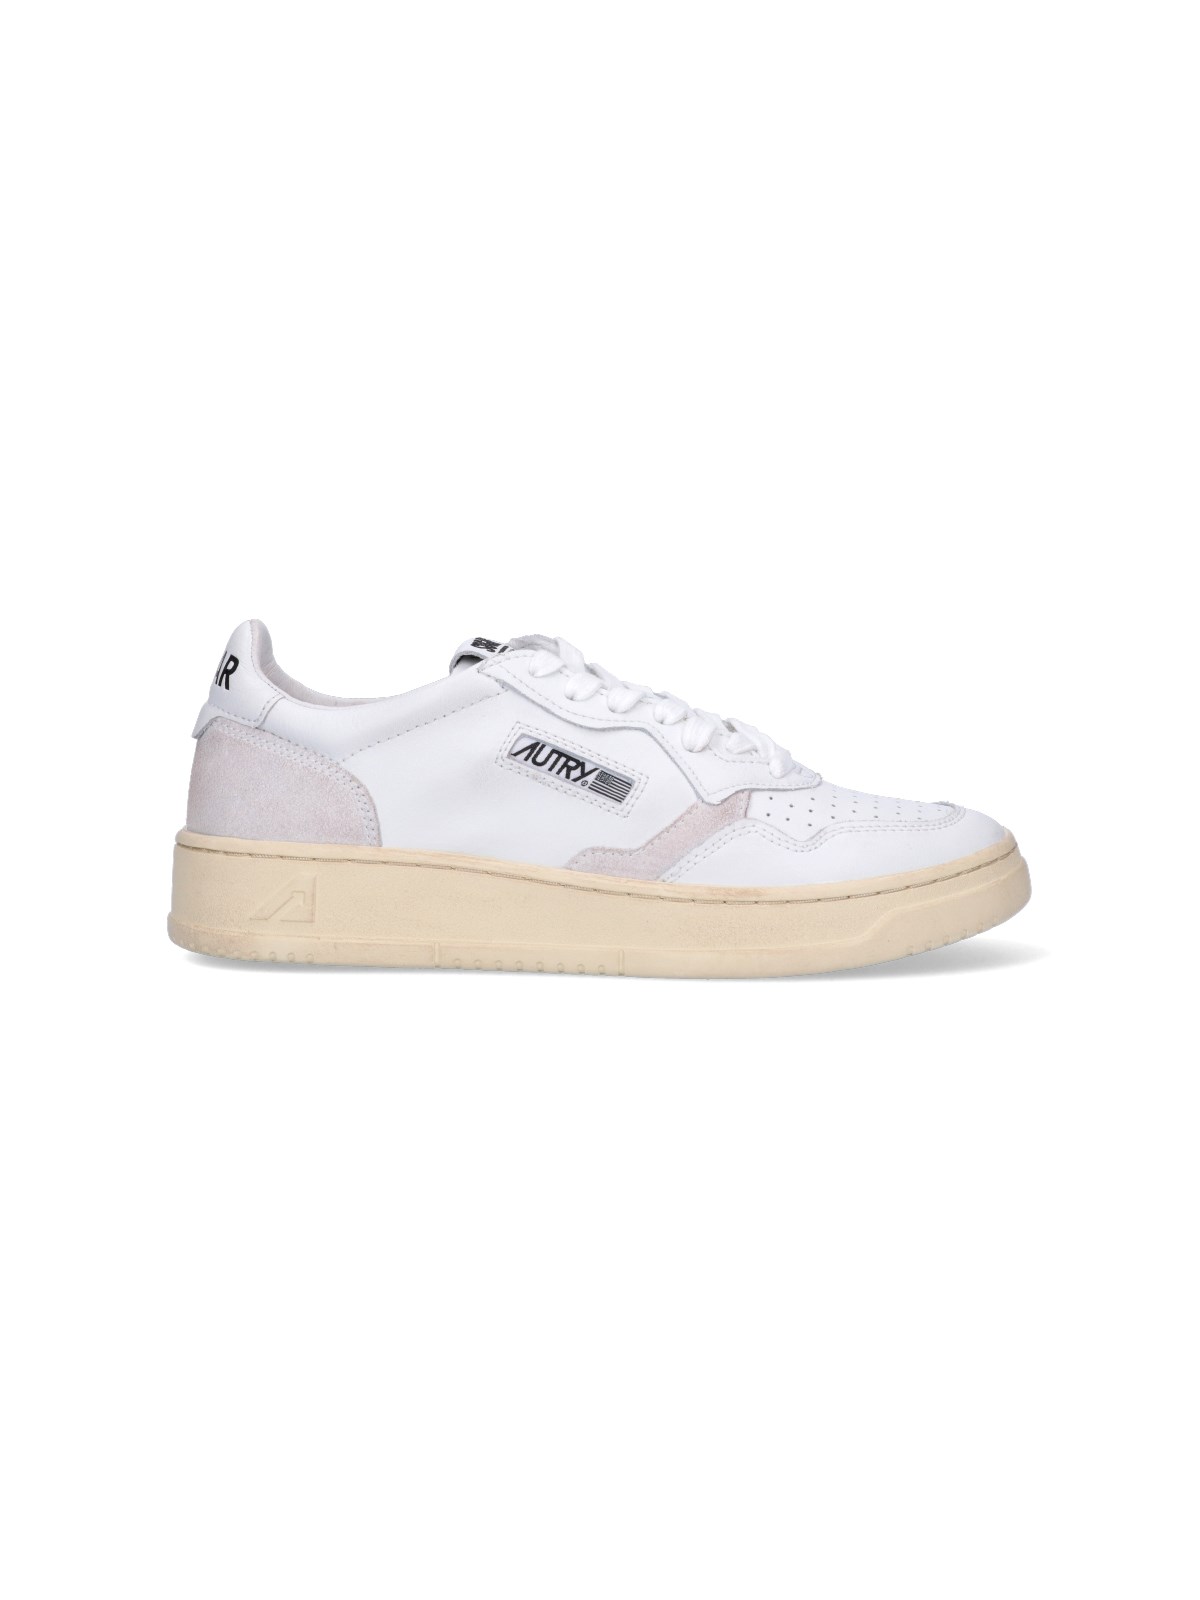 Autry X Sugar "m6" Sneakers In White